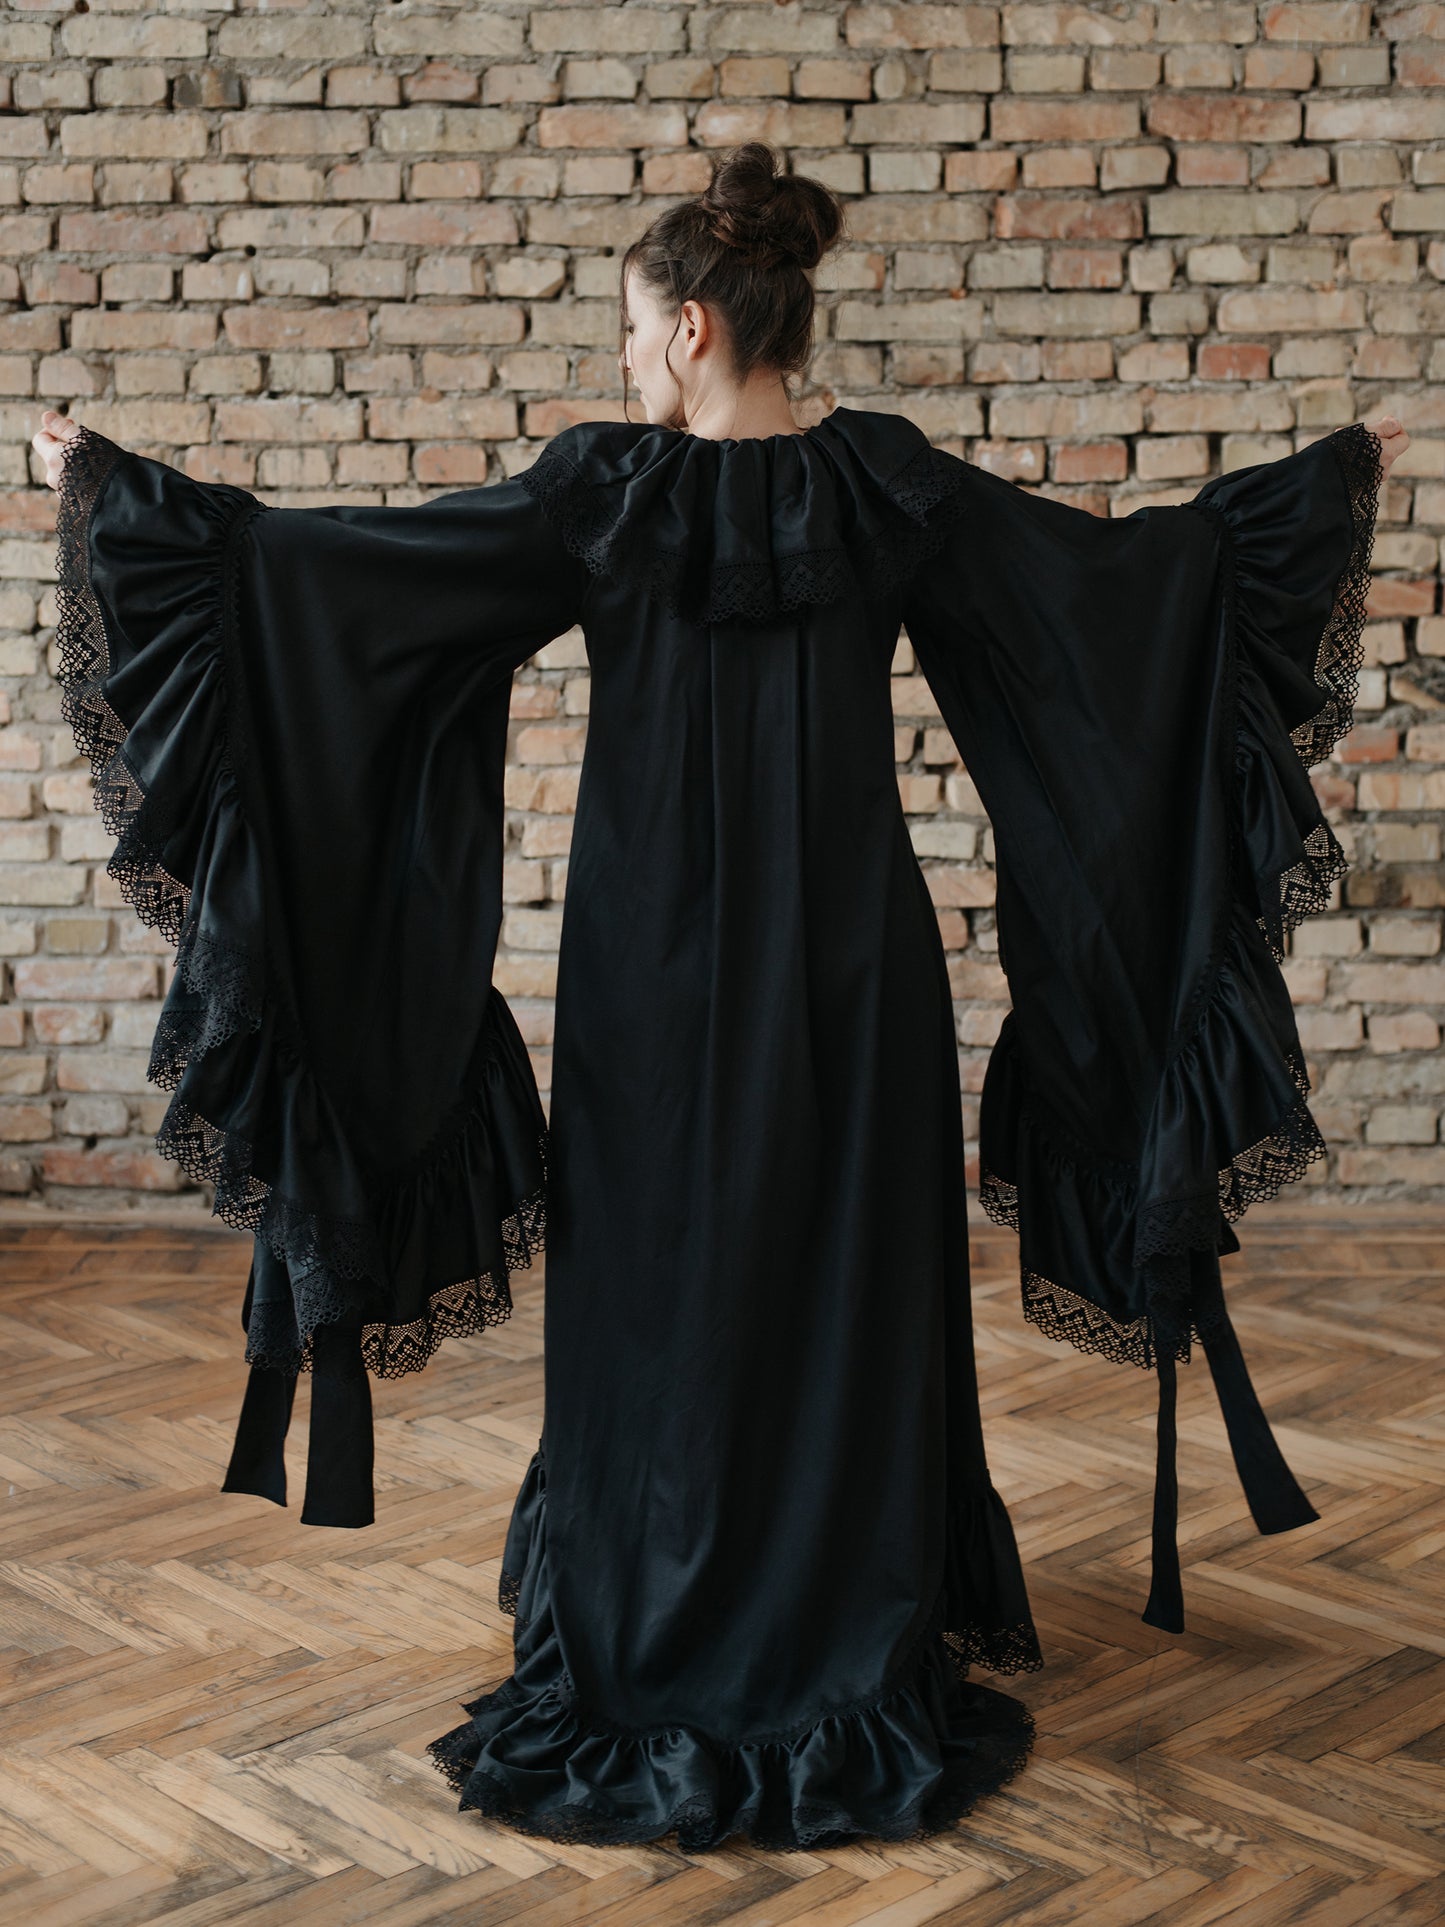 Queen Isabella - Rococo Inspired Negligee in Black